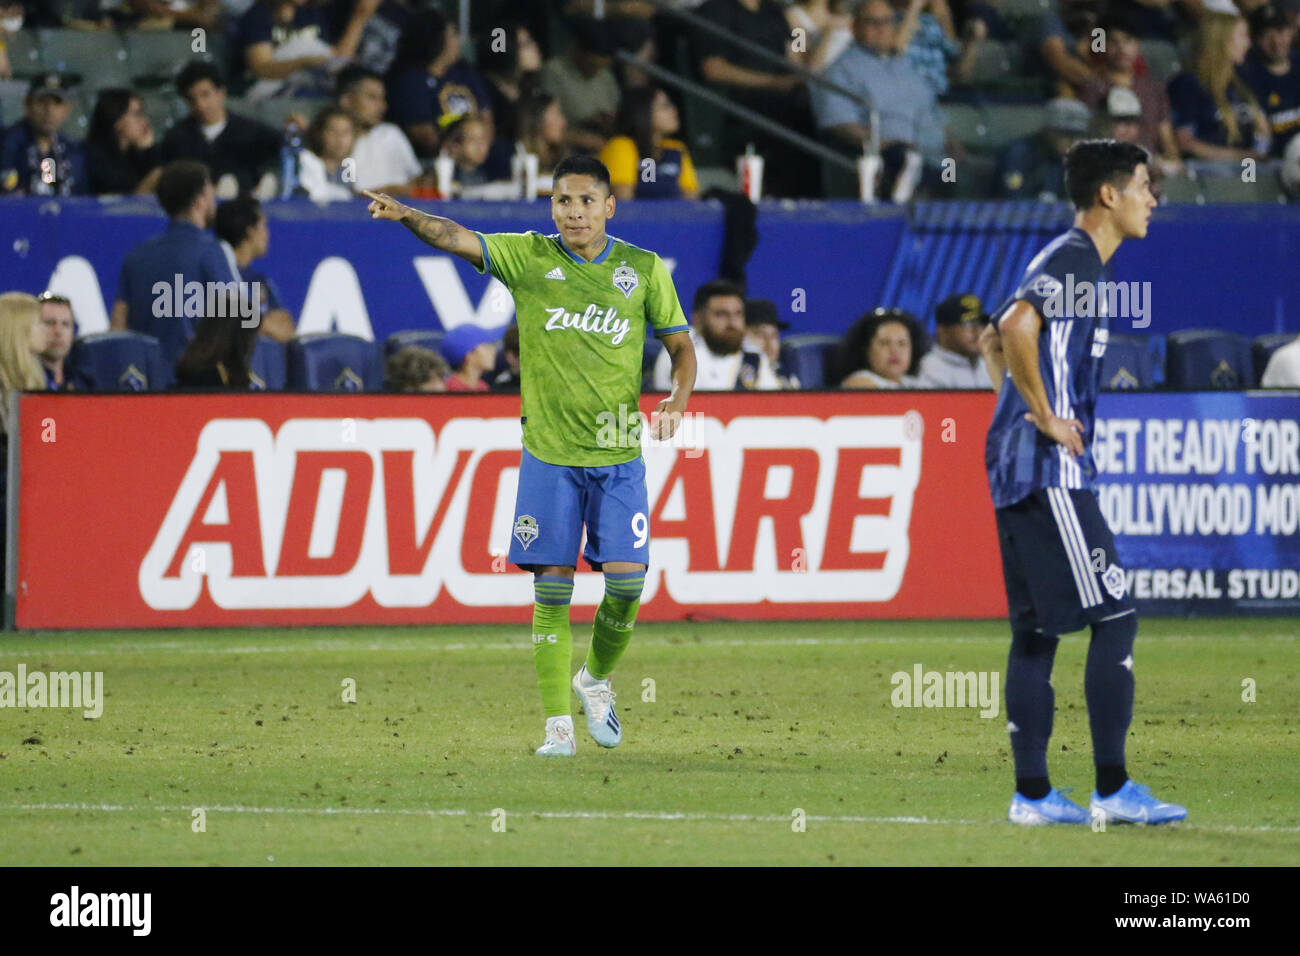 Los Angeles, California, USA. 17th Aug, 2019. Seattle Sounders midfielder Raul Ruidiaz (9) celebrates his goal during the 2019 Major League Soccer (MLS) match between LA Galaxy and Seattle Sounders in Carson, California, August 17, 2019. Credit: Ringo Chiu/ZUMA Wire/Alamy Live News Stock Photo